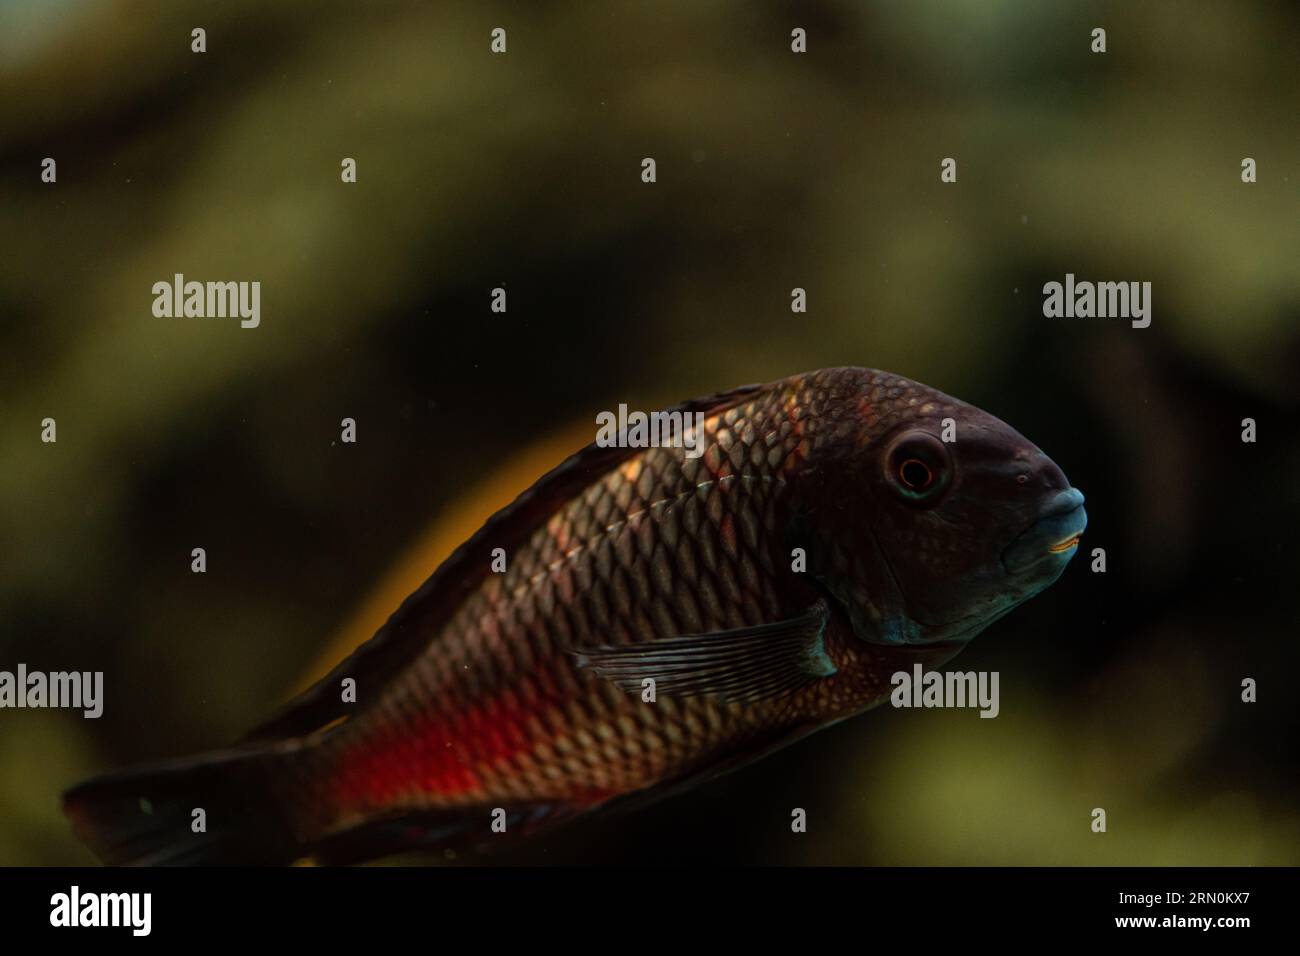 Aquarium Cichlid fish from Africa in close up. Pictured while diving, copy space for text Stock Photo